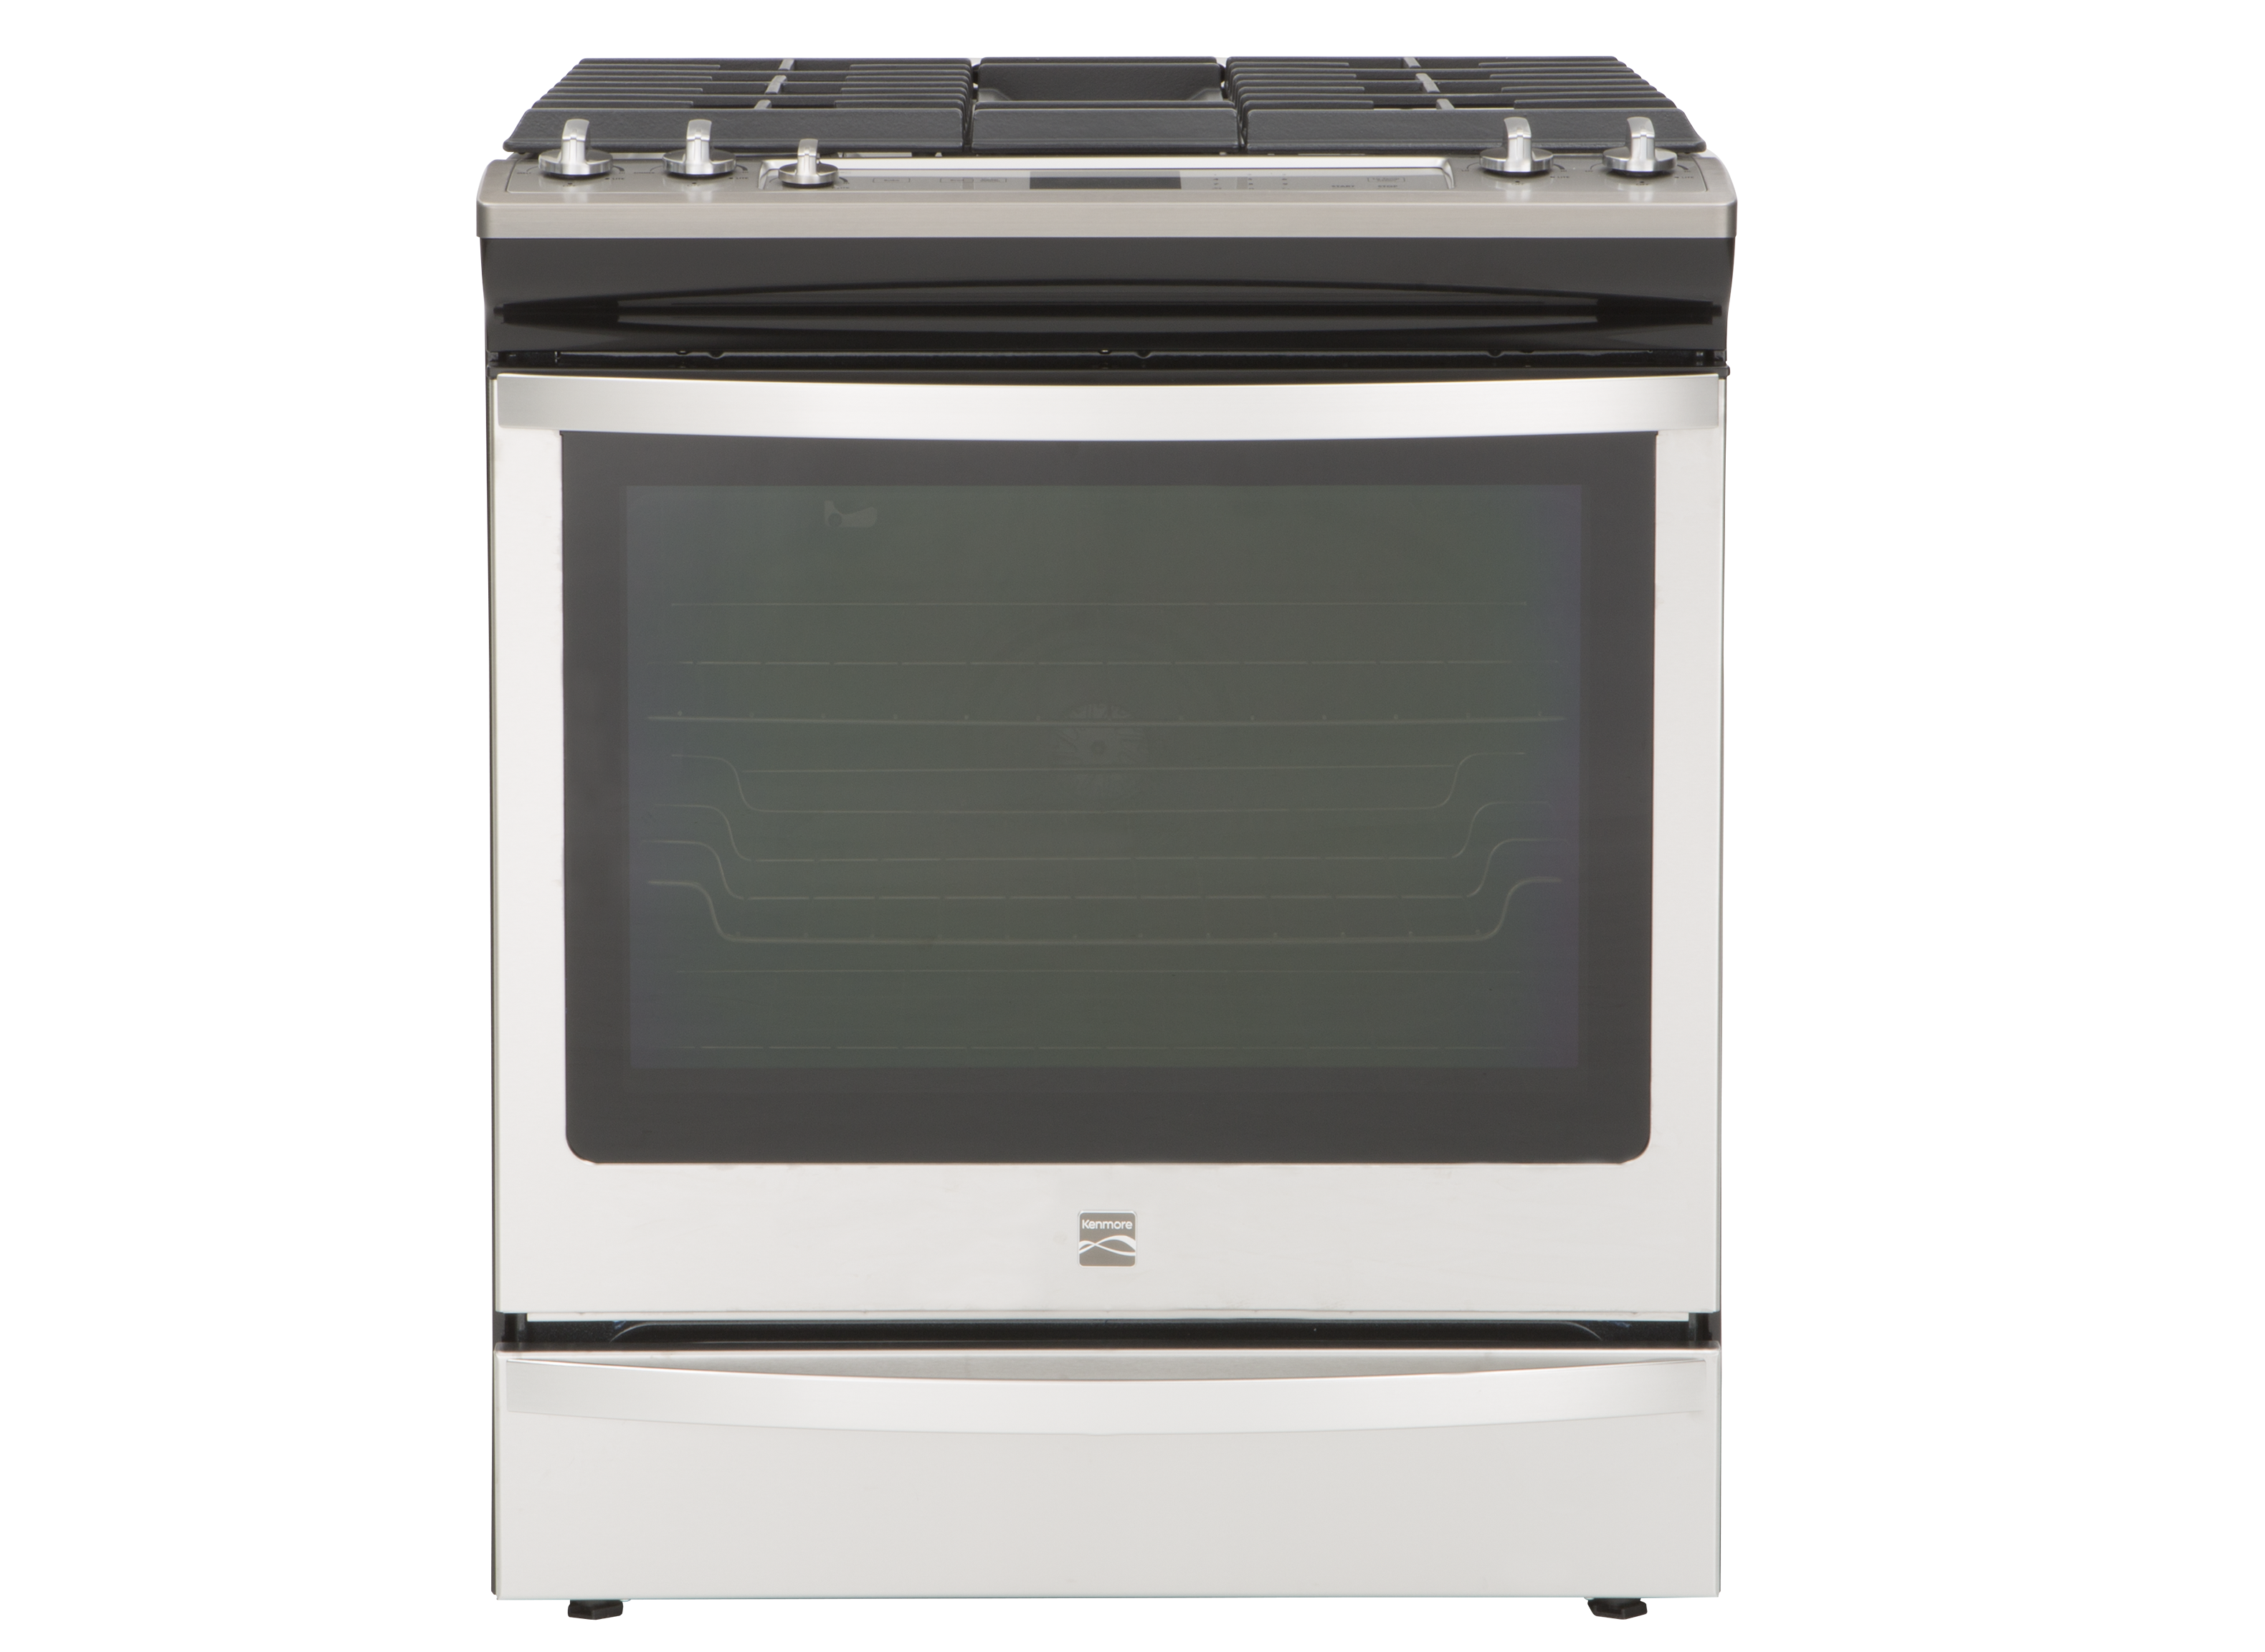 Kenmore Elite 97723 Double Oven Electric Range Review - Reviewed